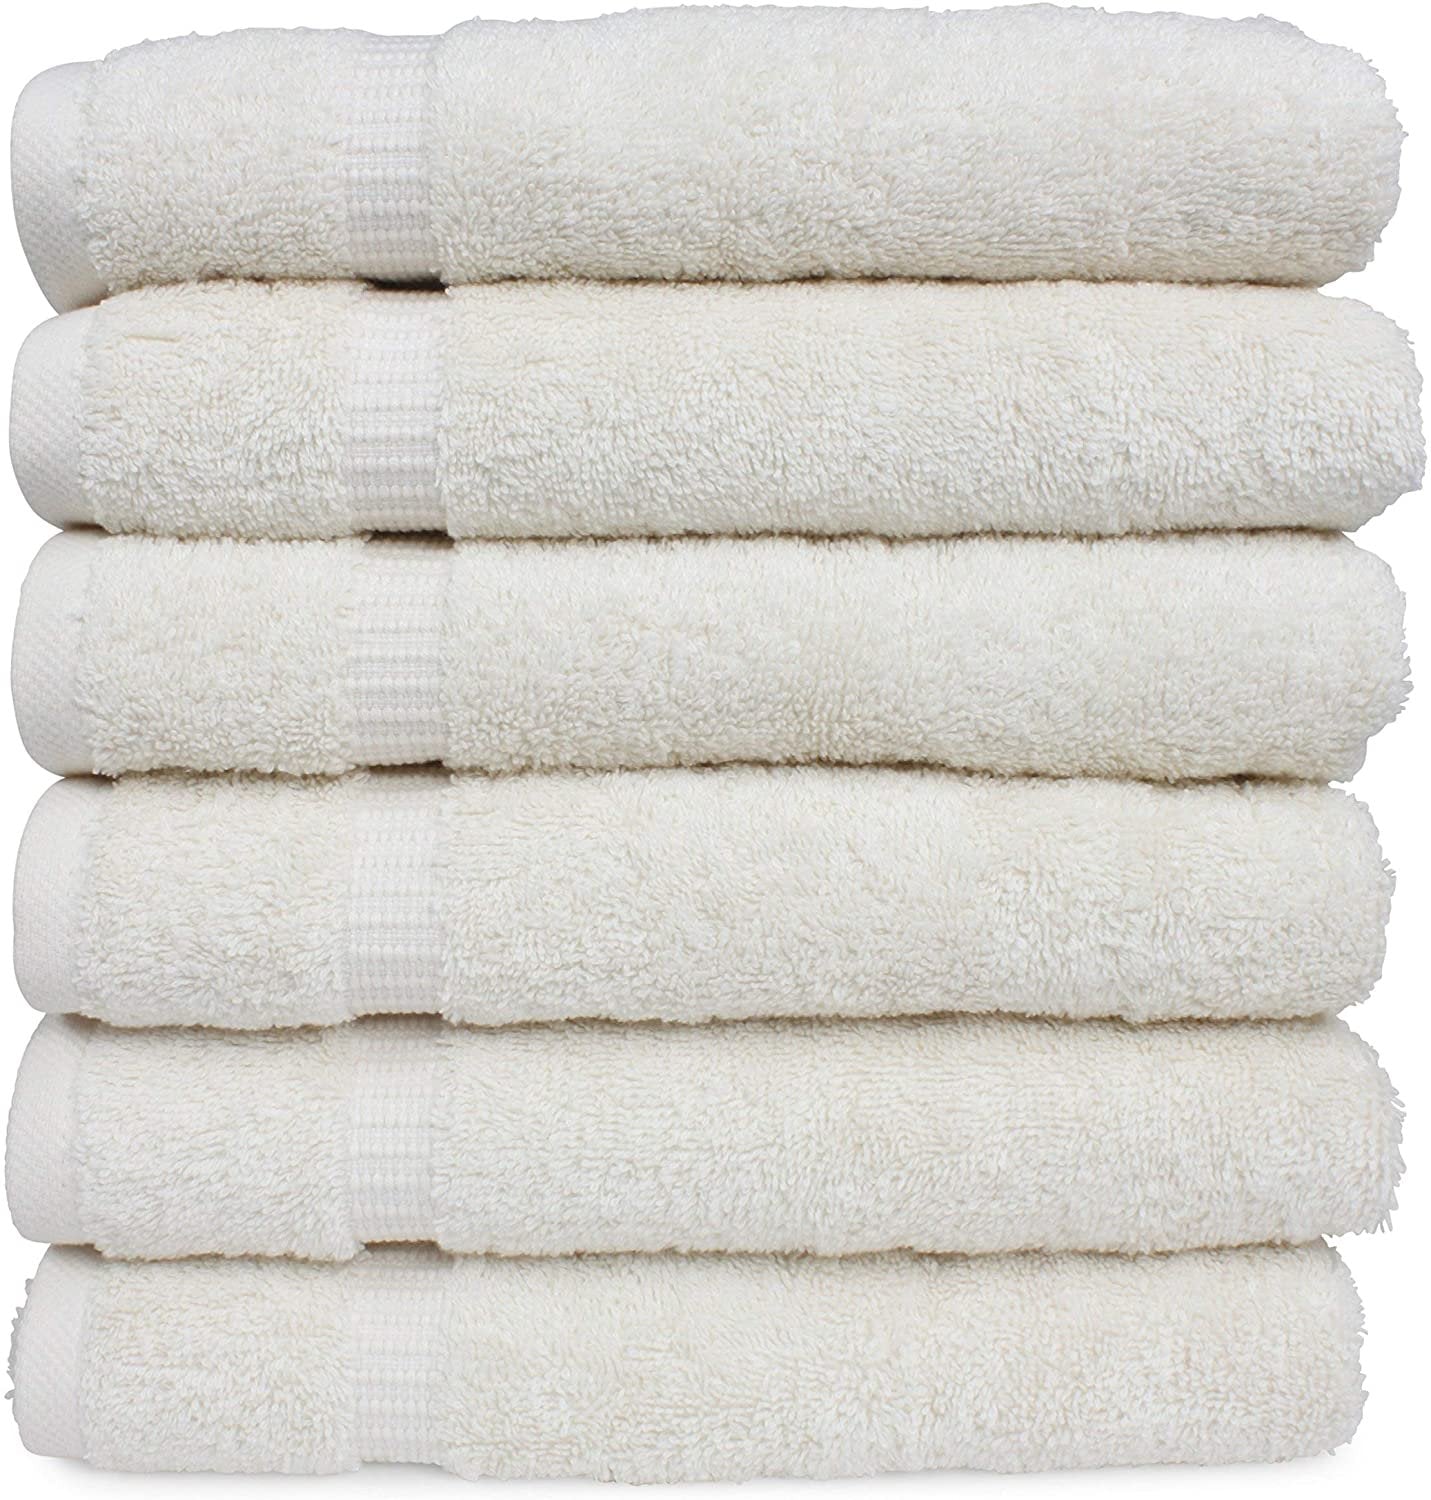 16x30 Wholesale White Luxury Hand Towels - Fast Shipping